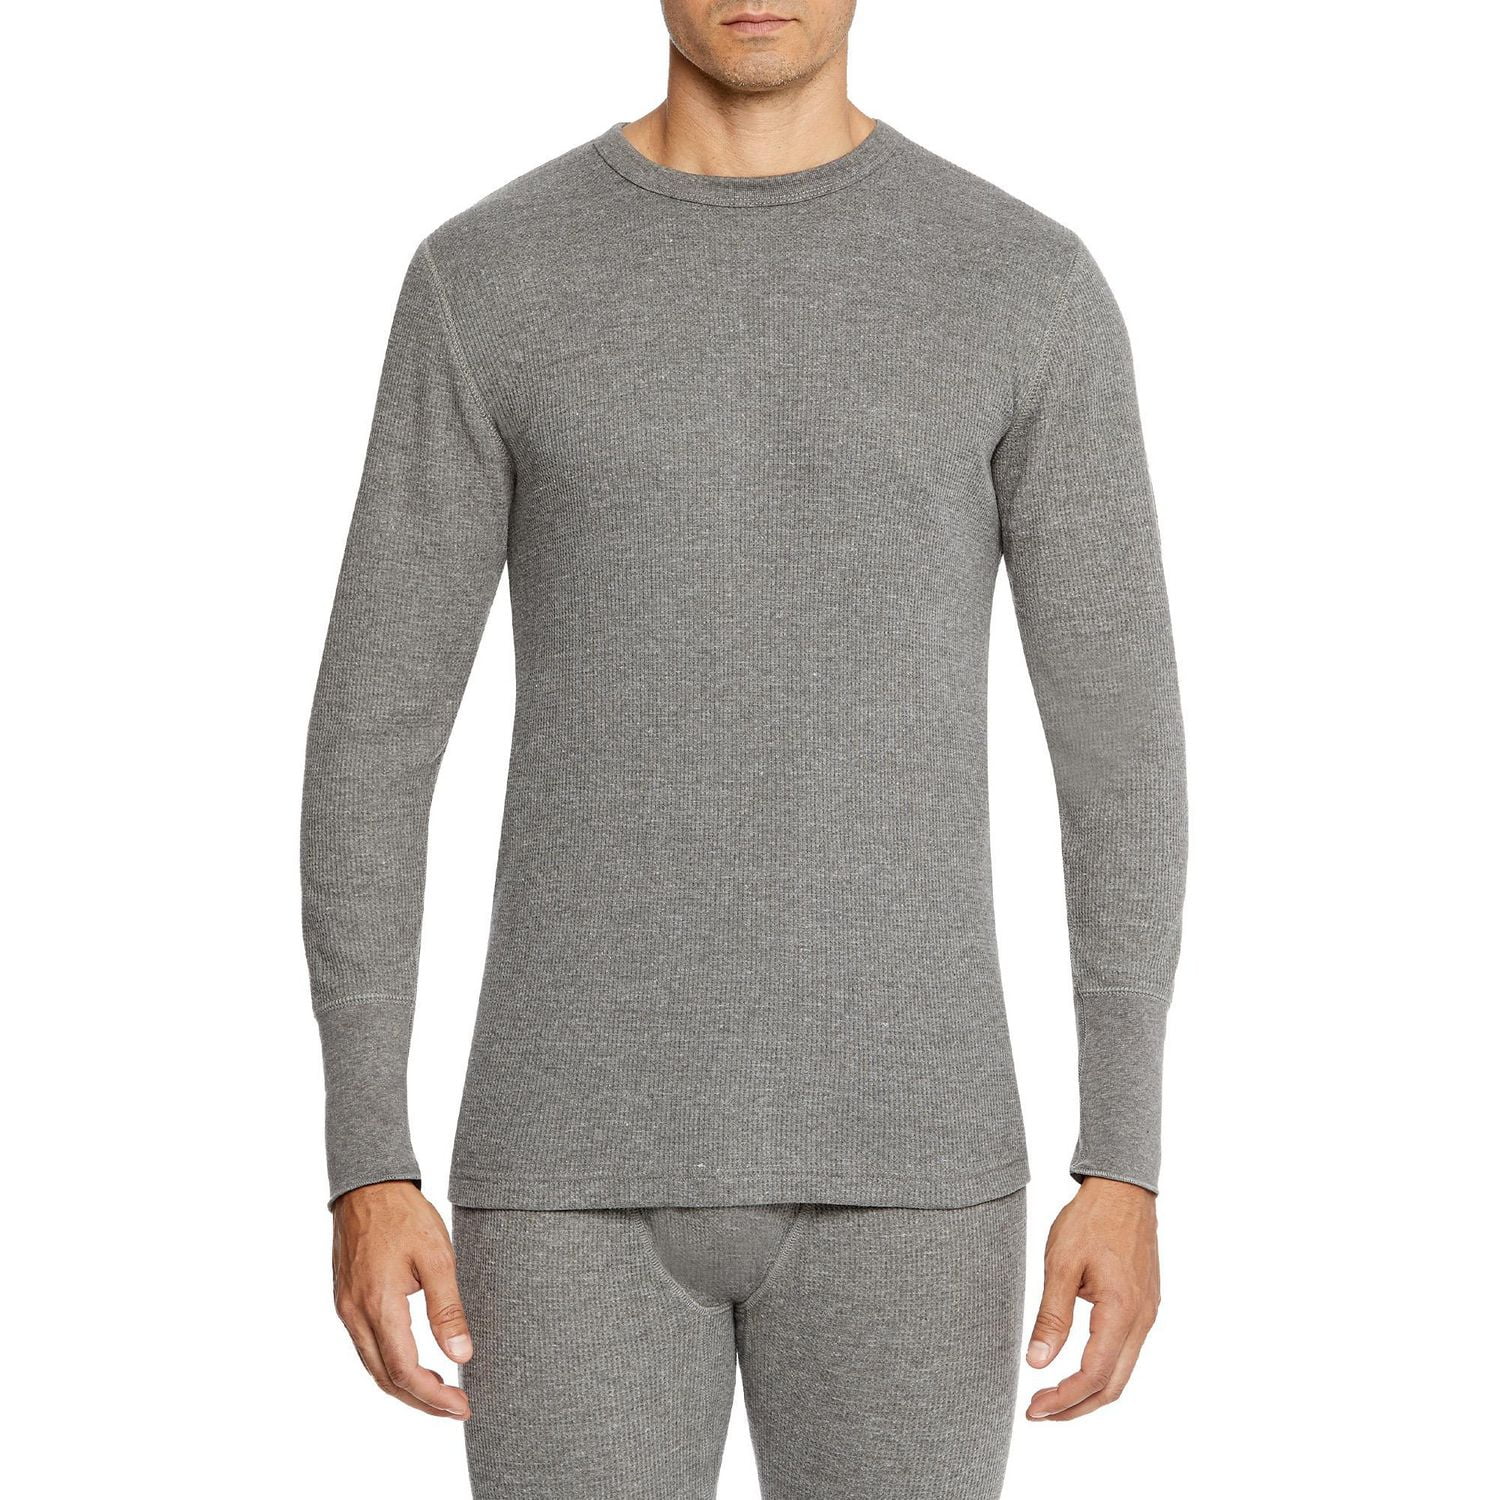 Stanfield's Thermal Waffle Knit Shirt